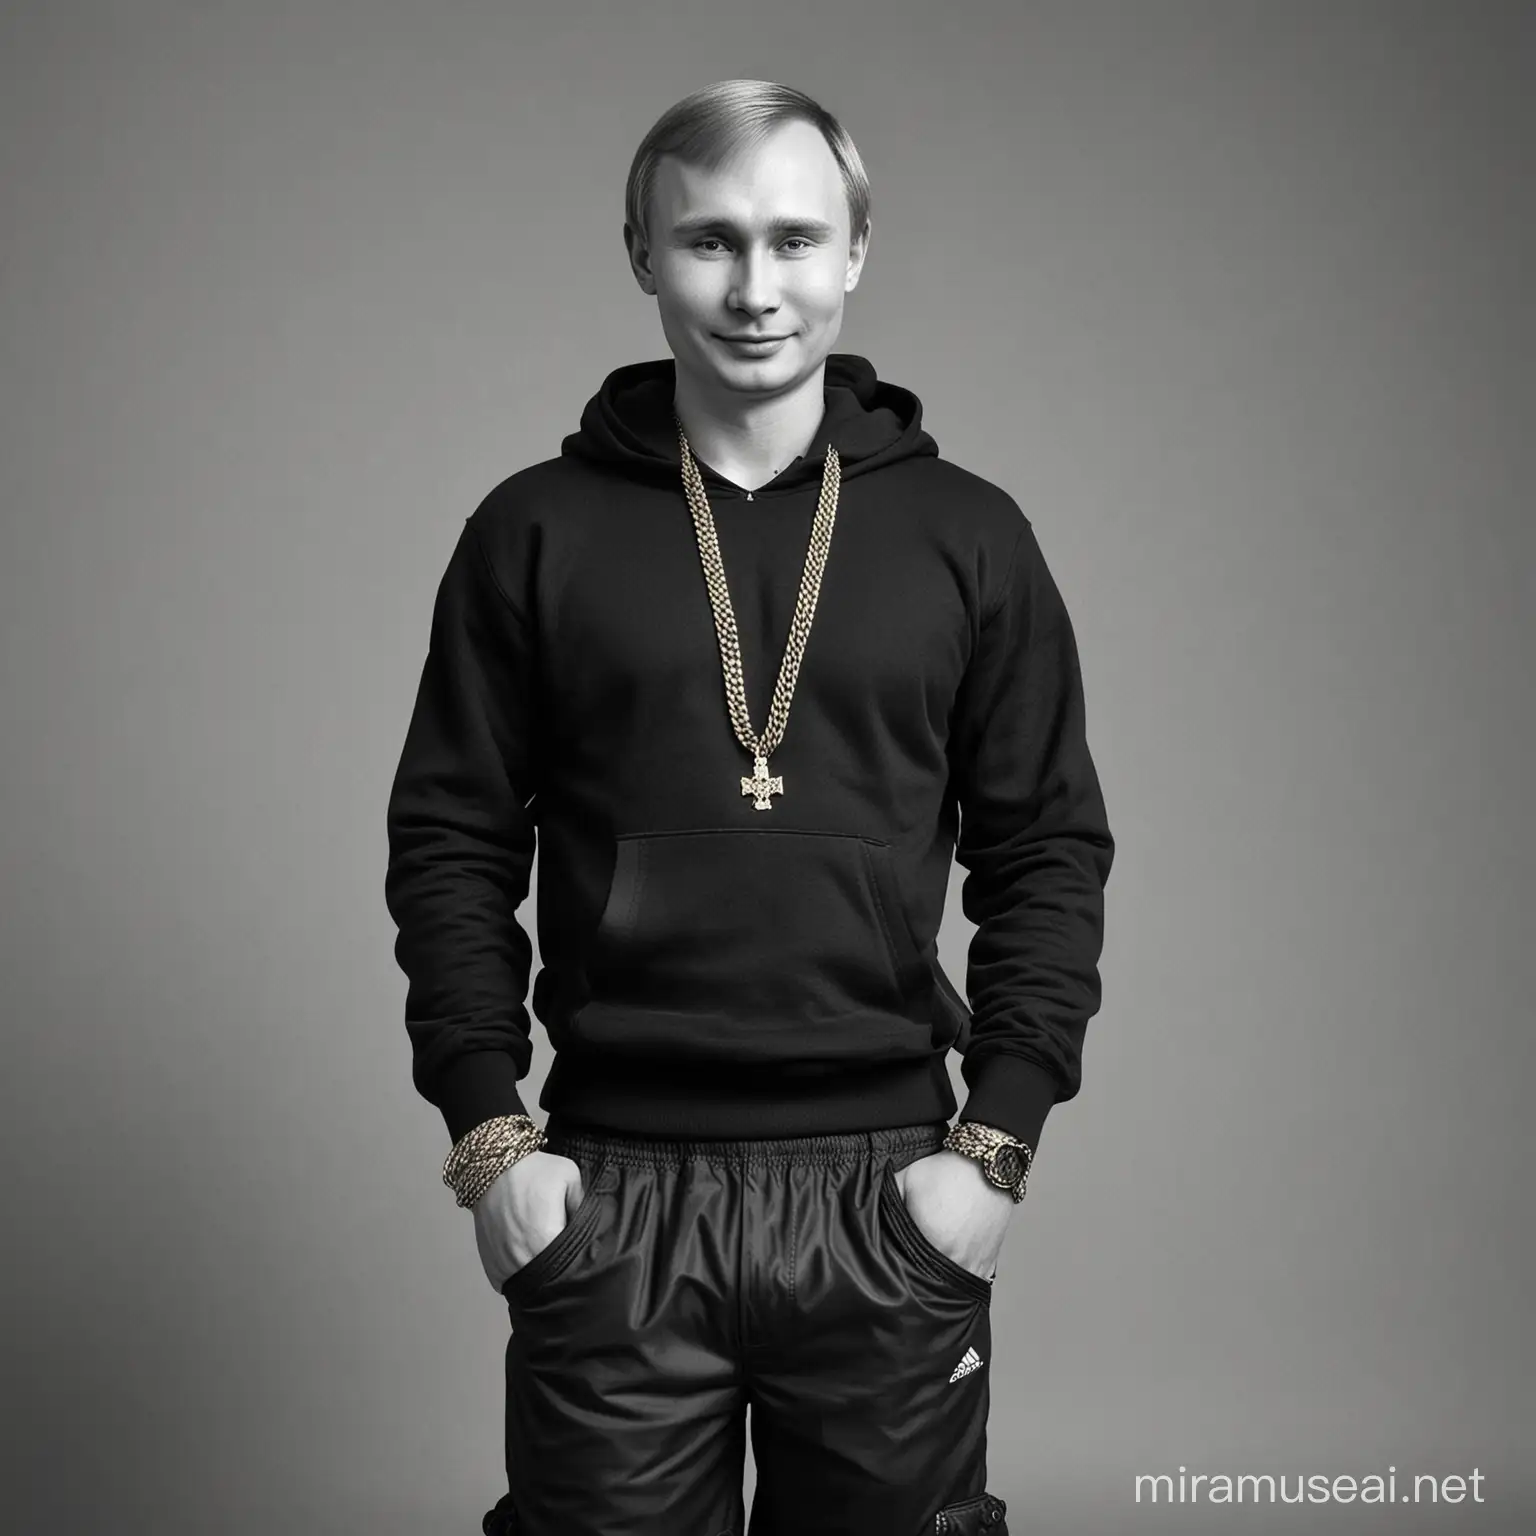 Black and white fashion photo of a young man (looks like the young Putin, smiling, large gold chain on his neck) posing  wearing a black hoodie, grey adidas shorts and crocks.